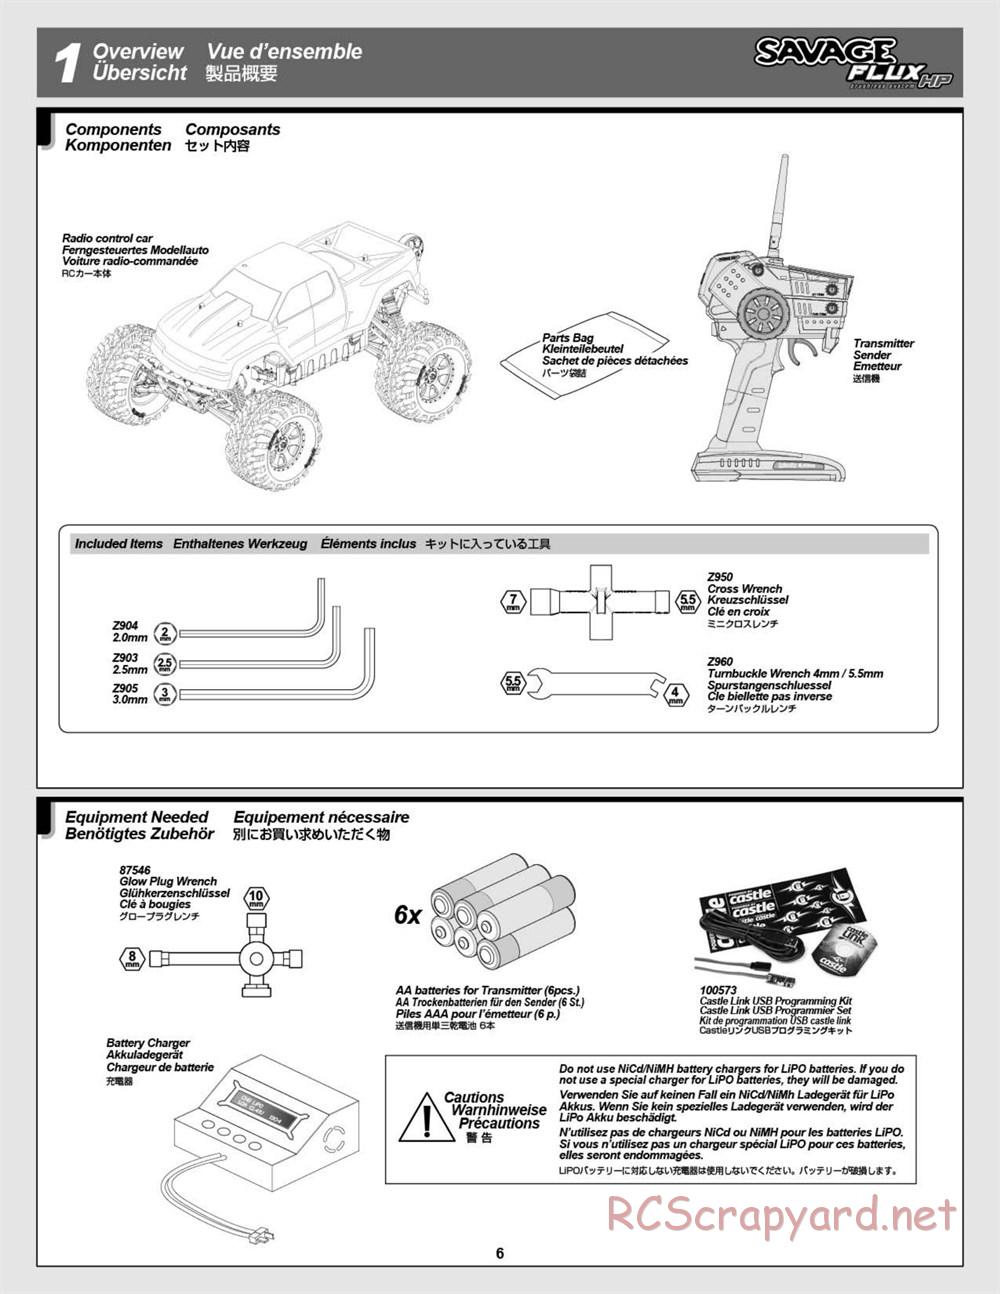 HPI - Savage Flux HP - Manual - Page 6